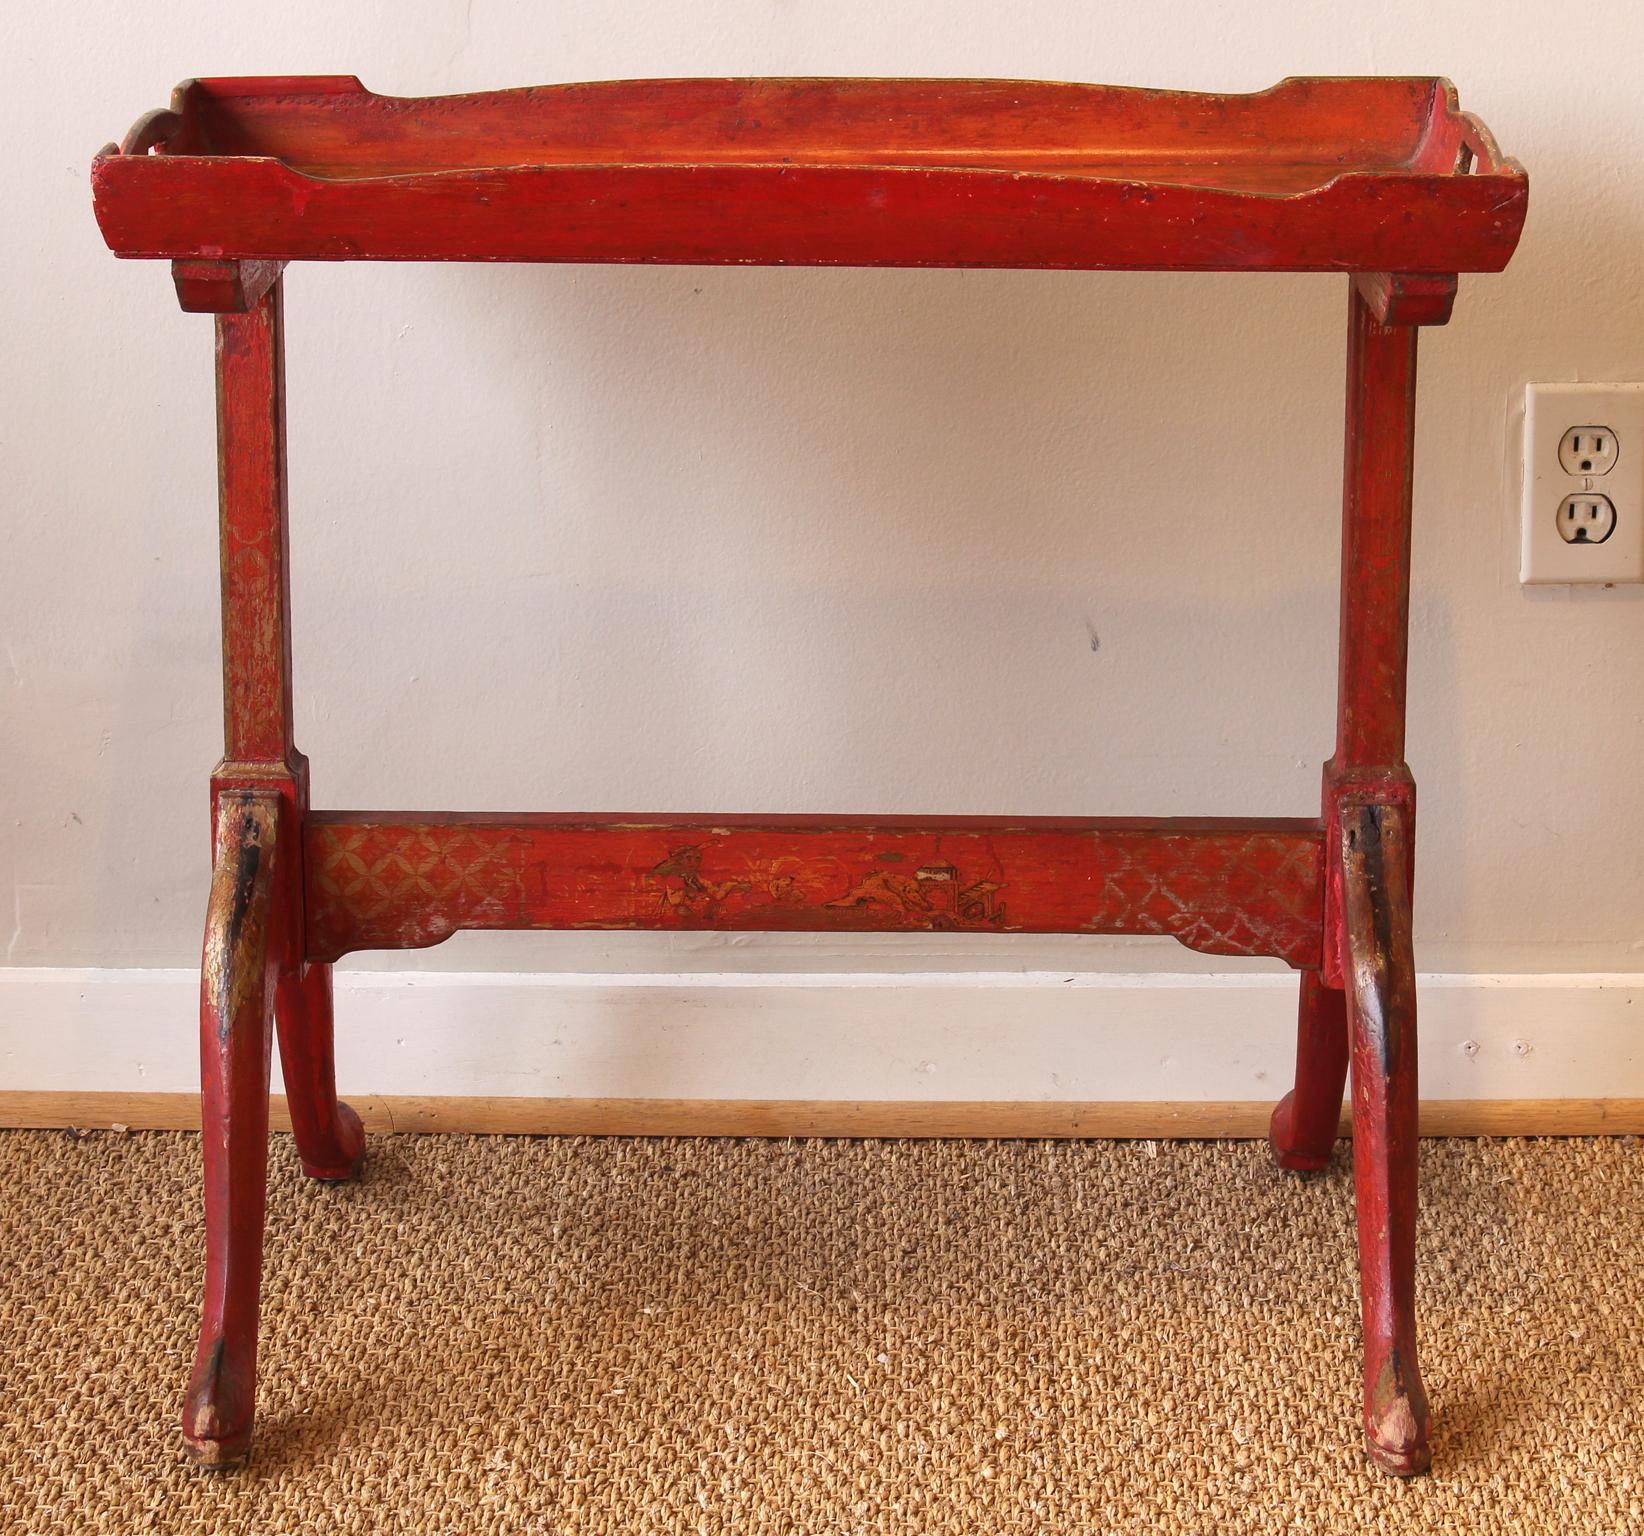 A small late 19th century. English scarlet painted chinoiserie decorated tray-top side table.